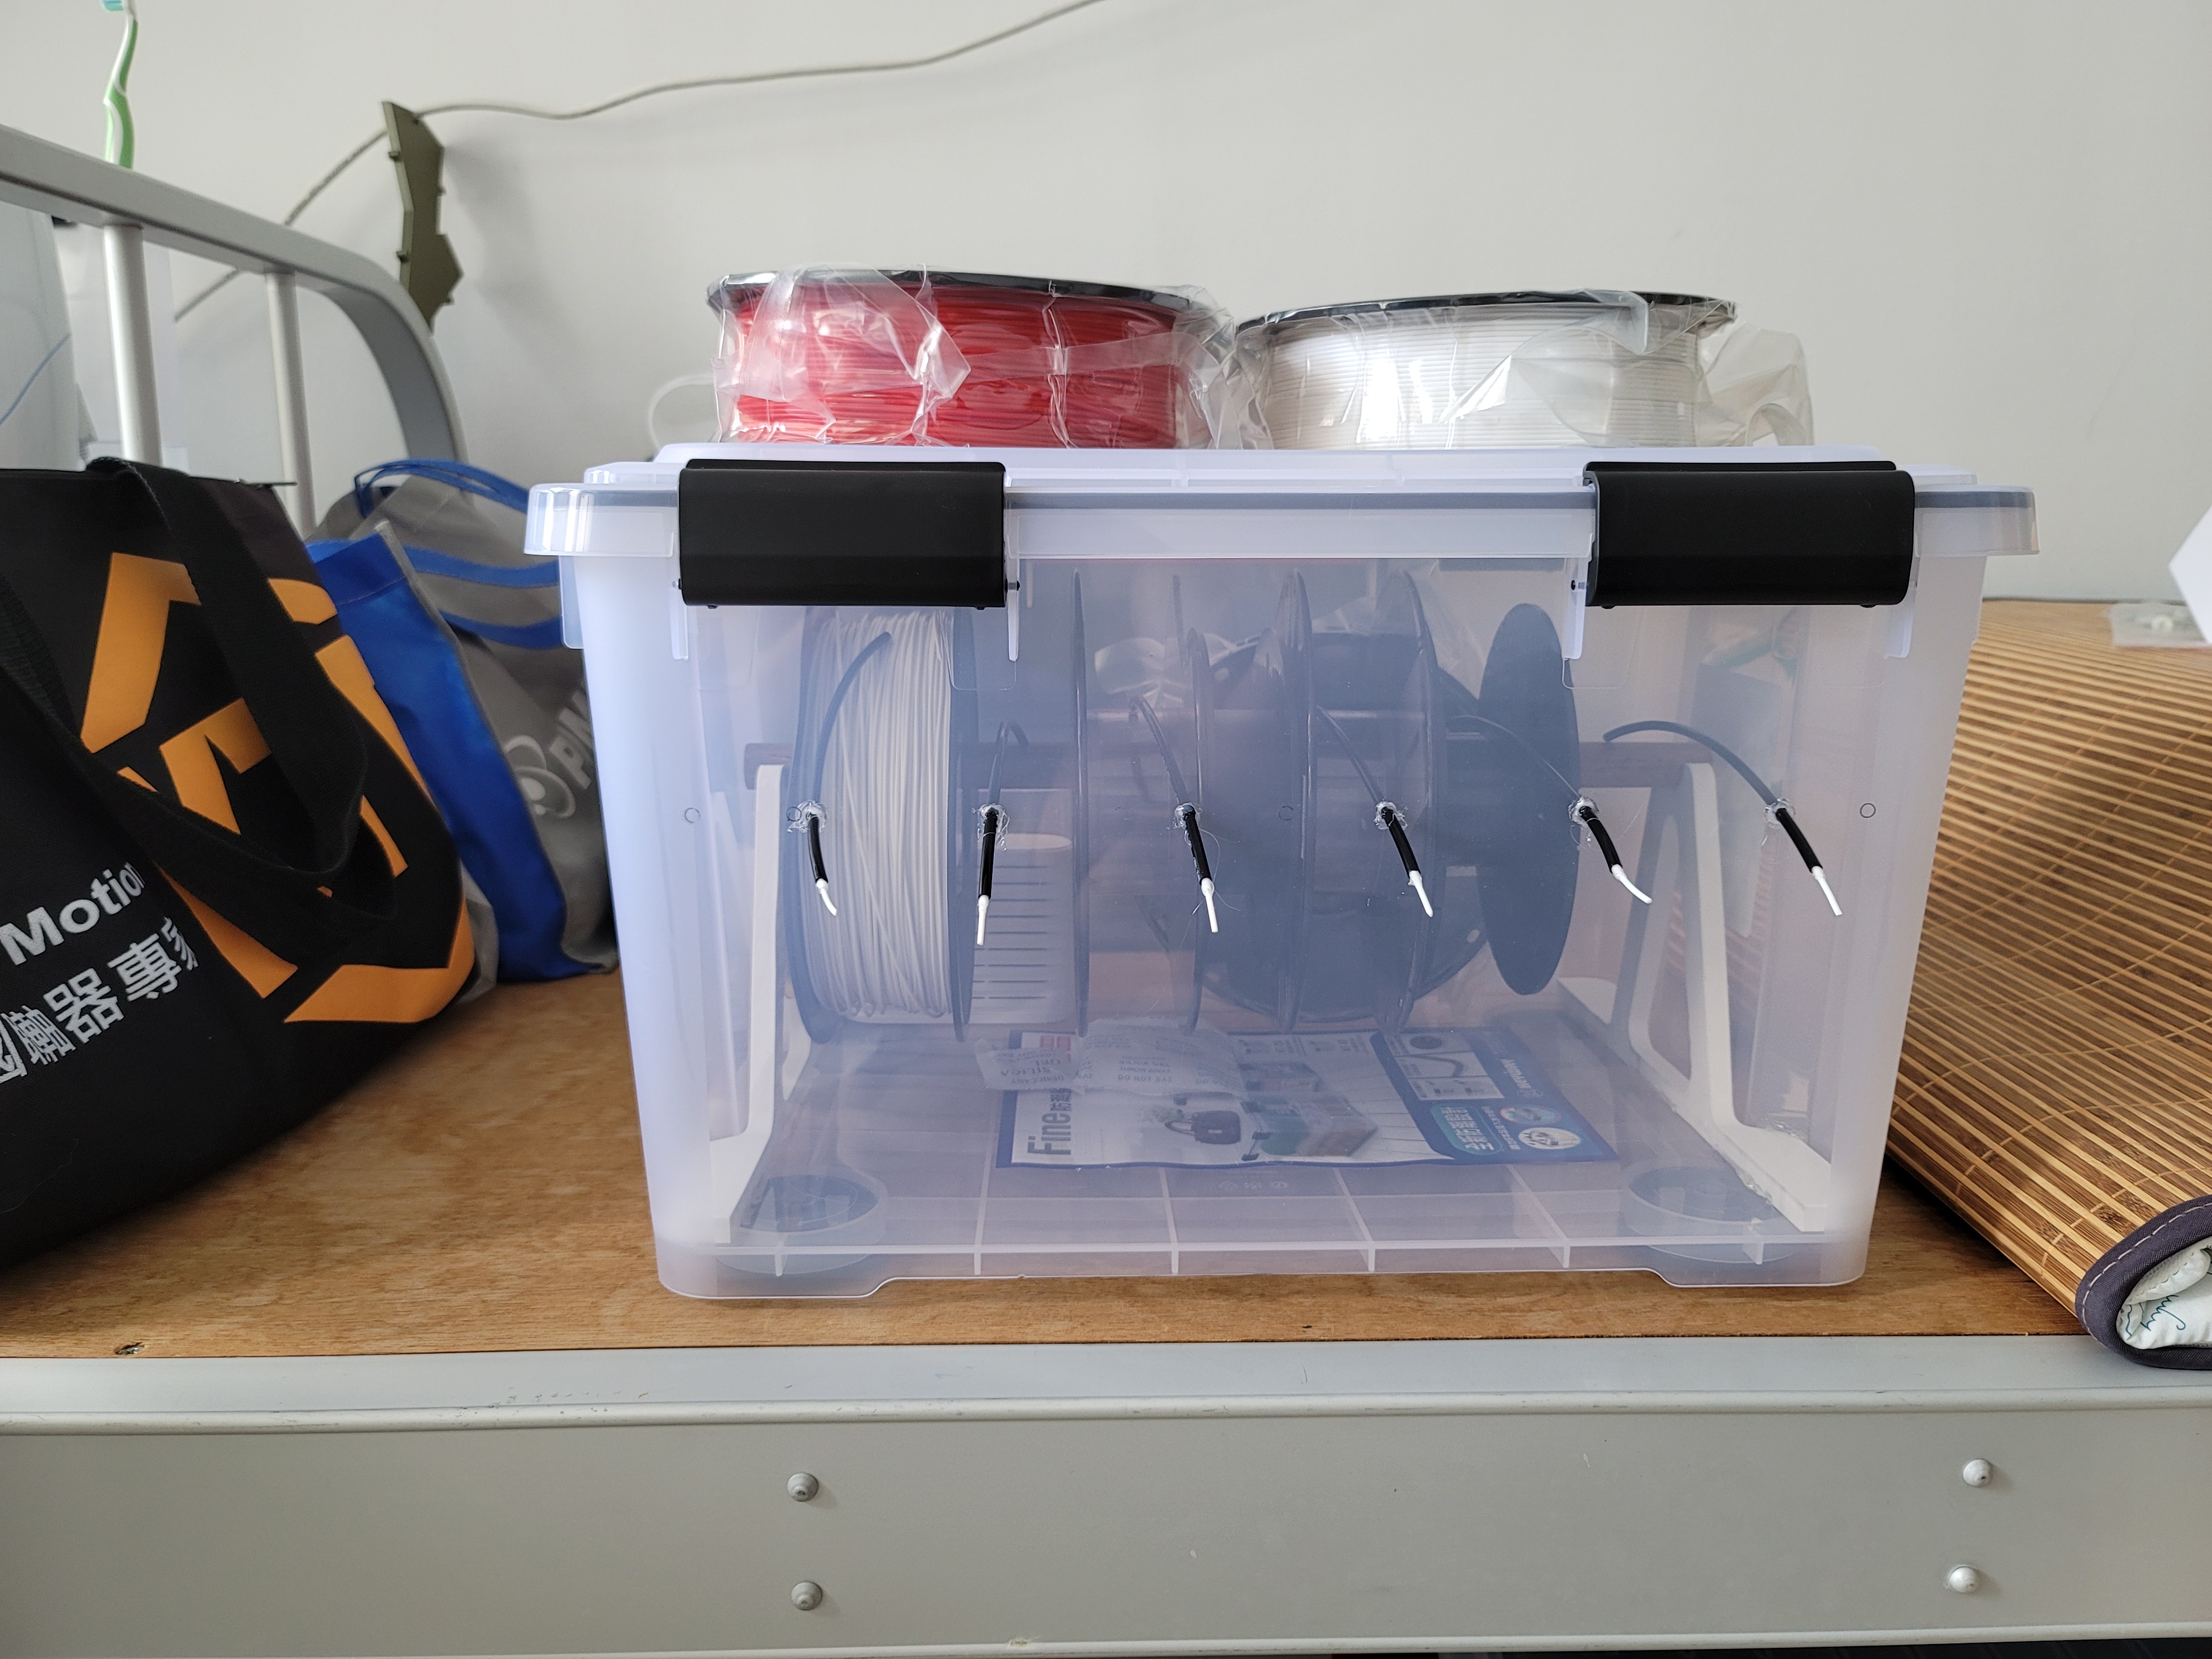 Filament dry box for KT-35-0